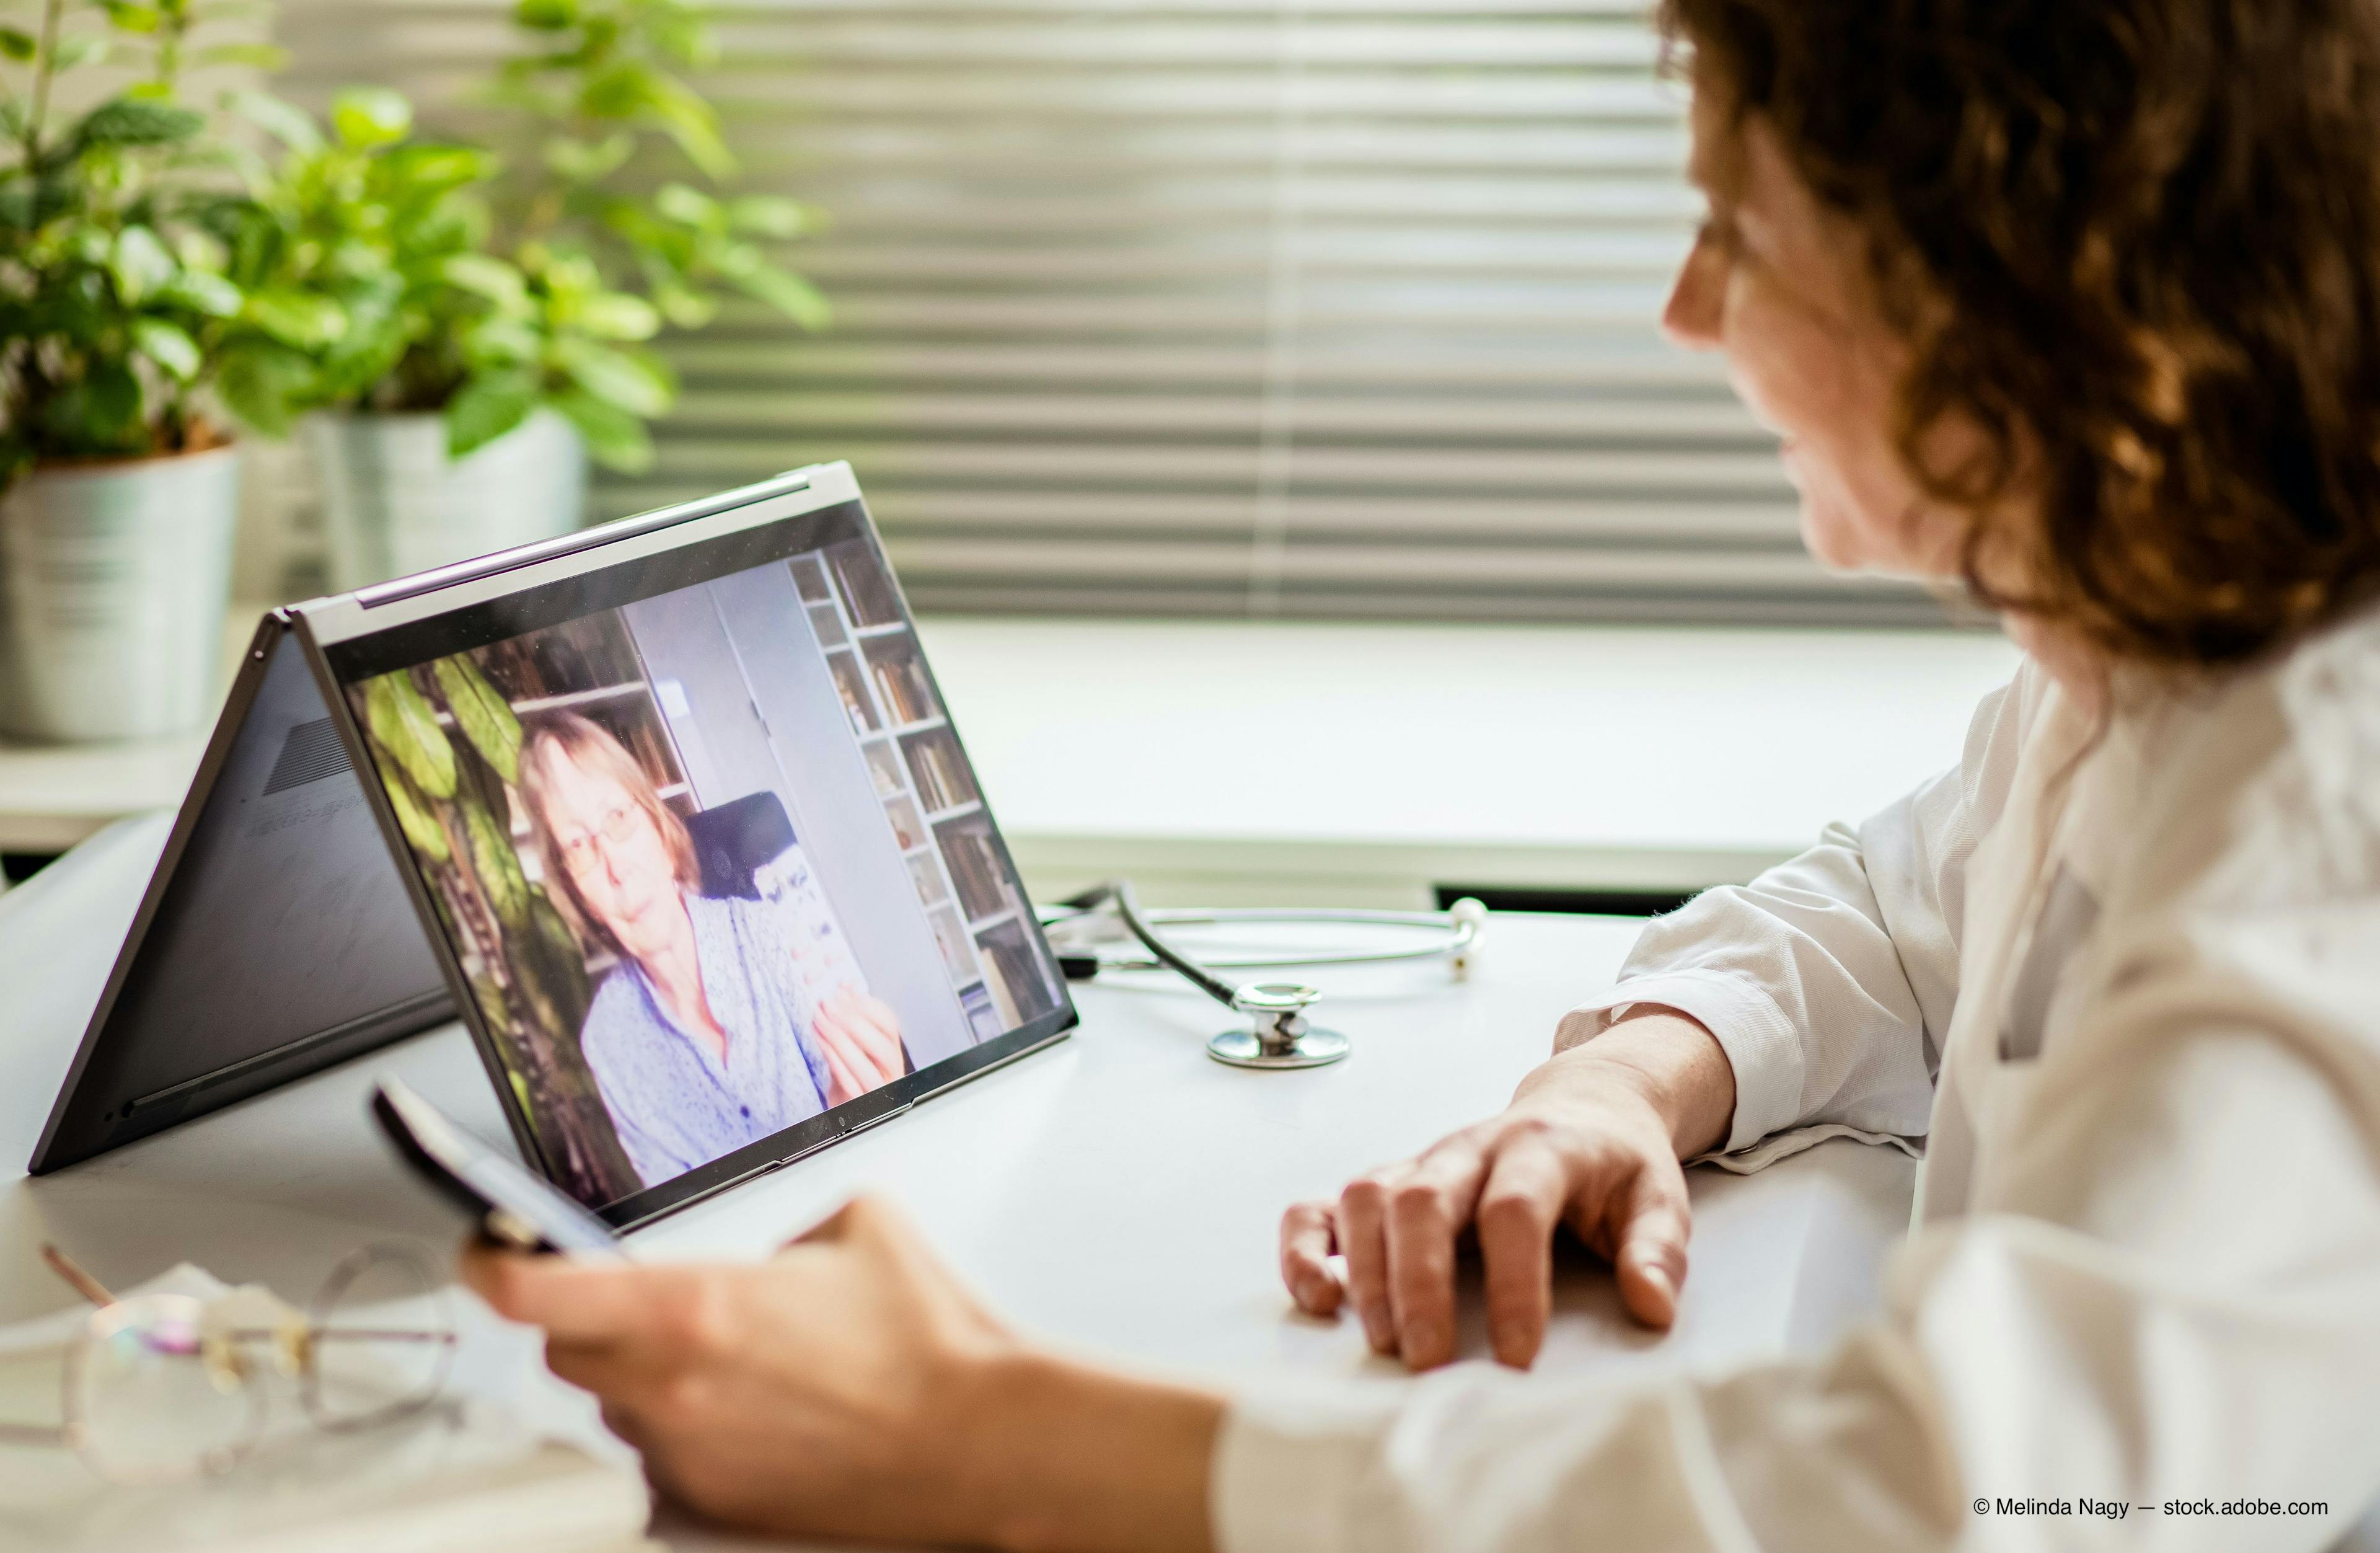 Clearing hurdles to large scale telemedicine adoption